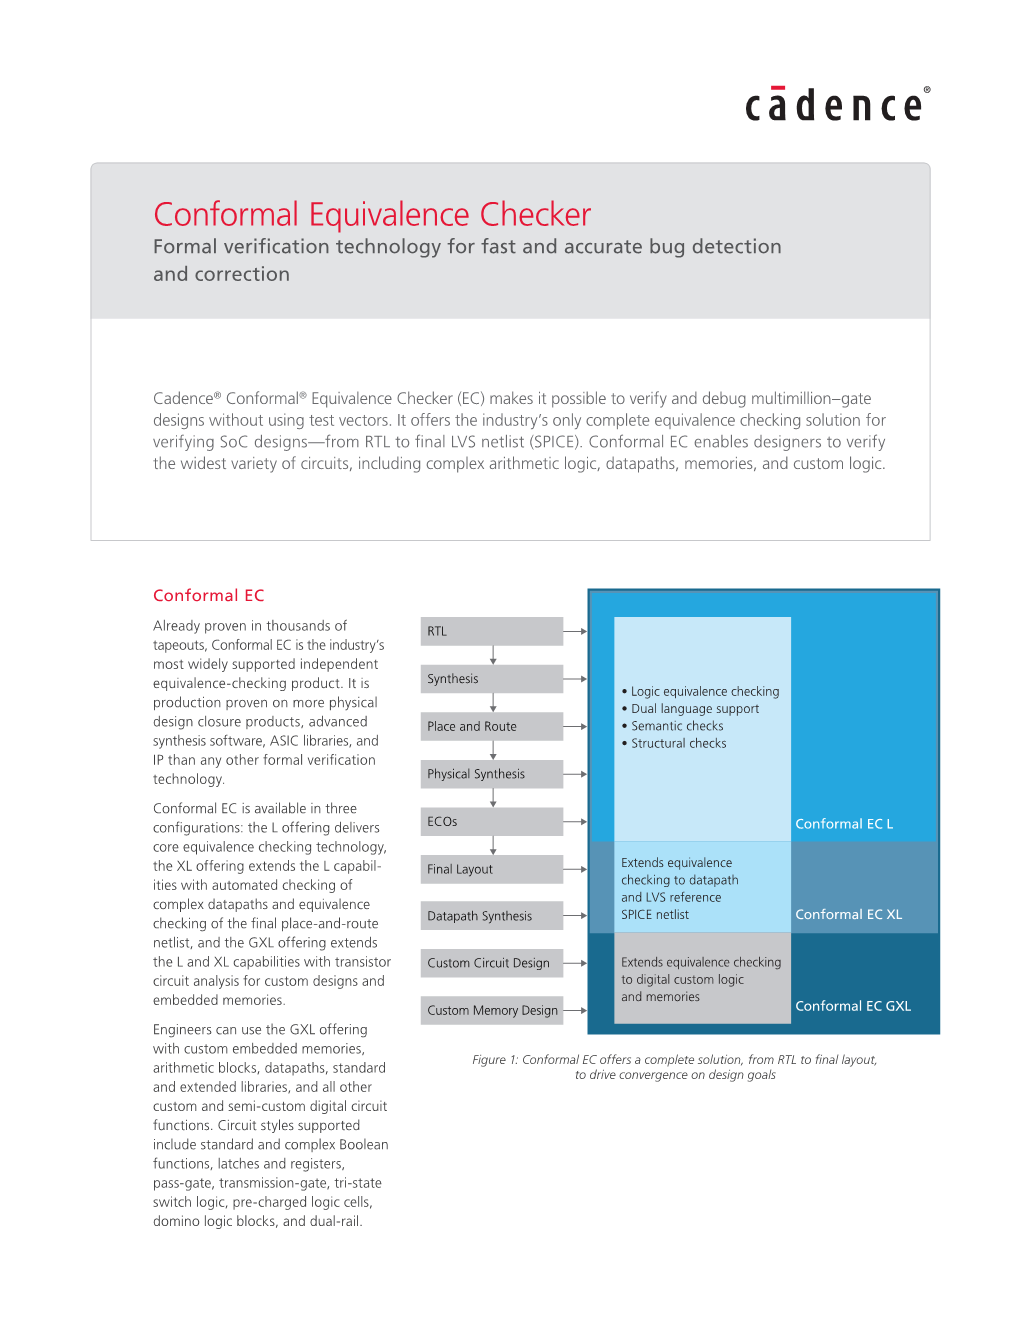 Conformal Equivalence Checker Formal Verification Technology for Fast and Accurate Bug Detection and Correction